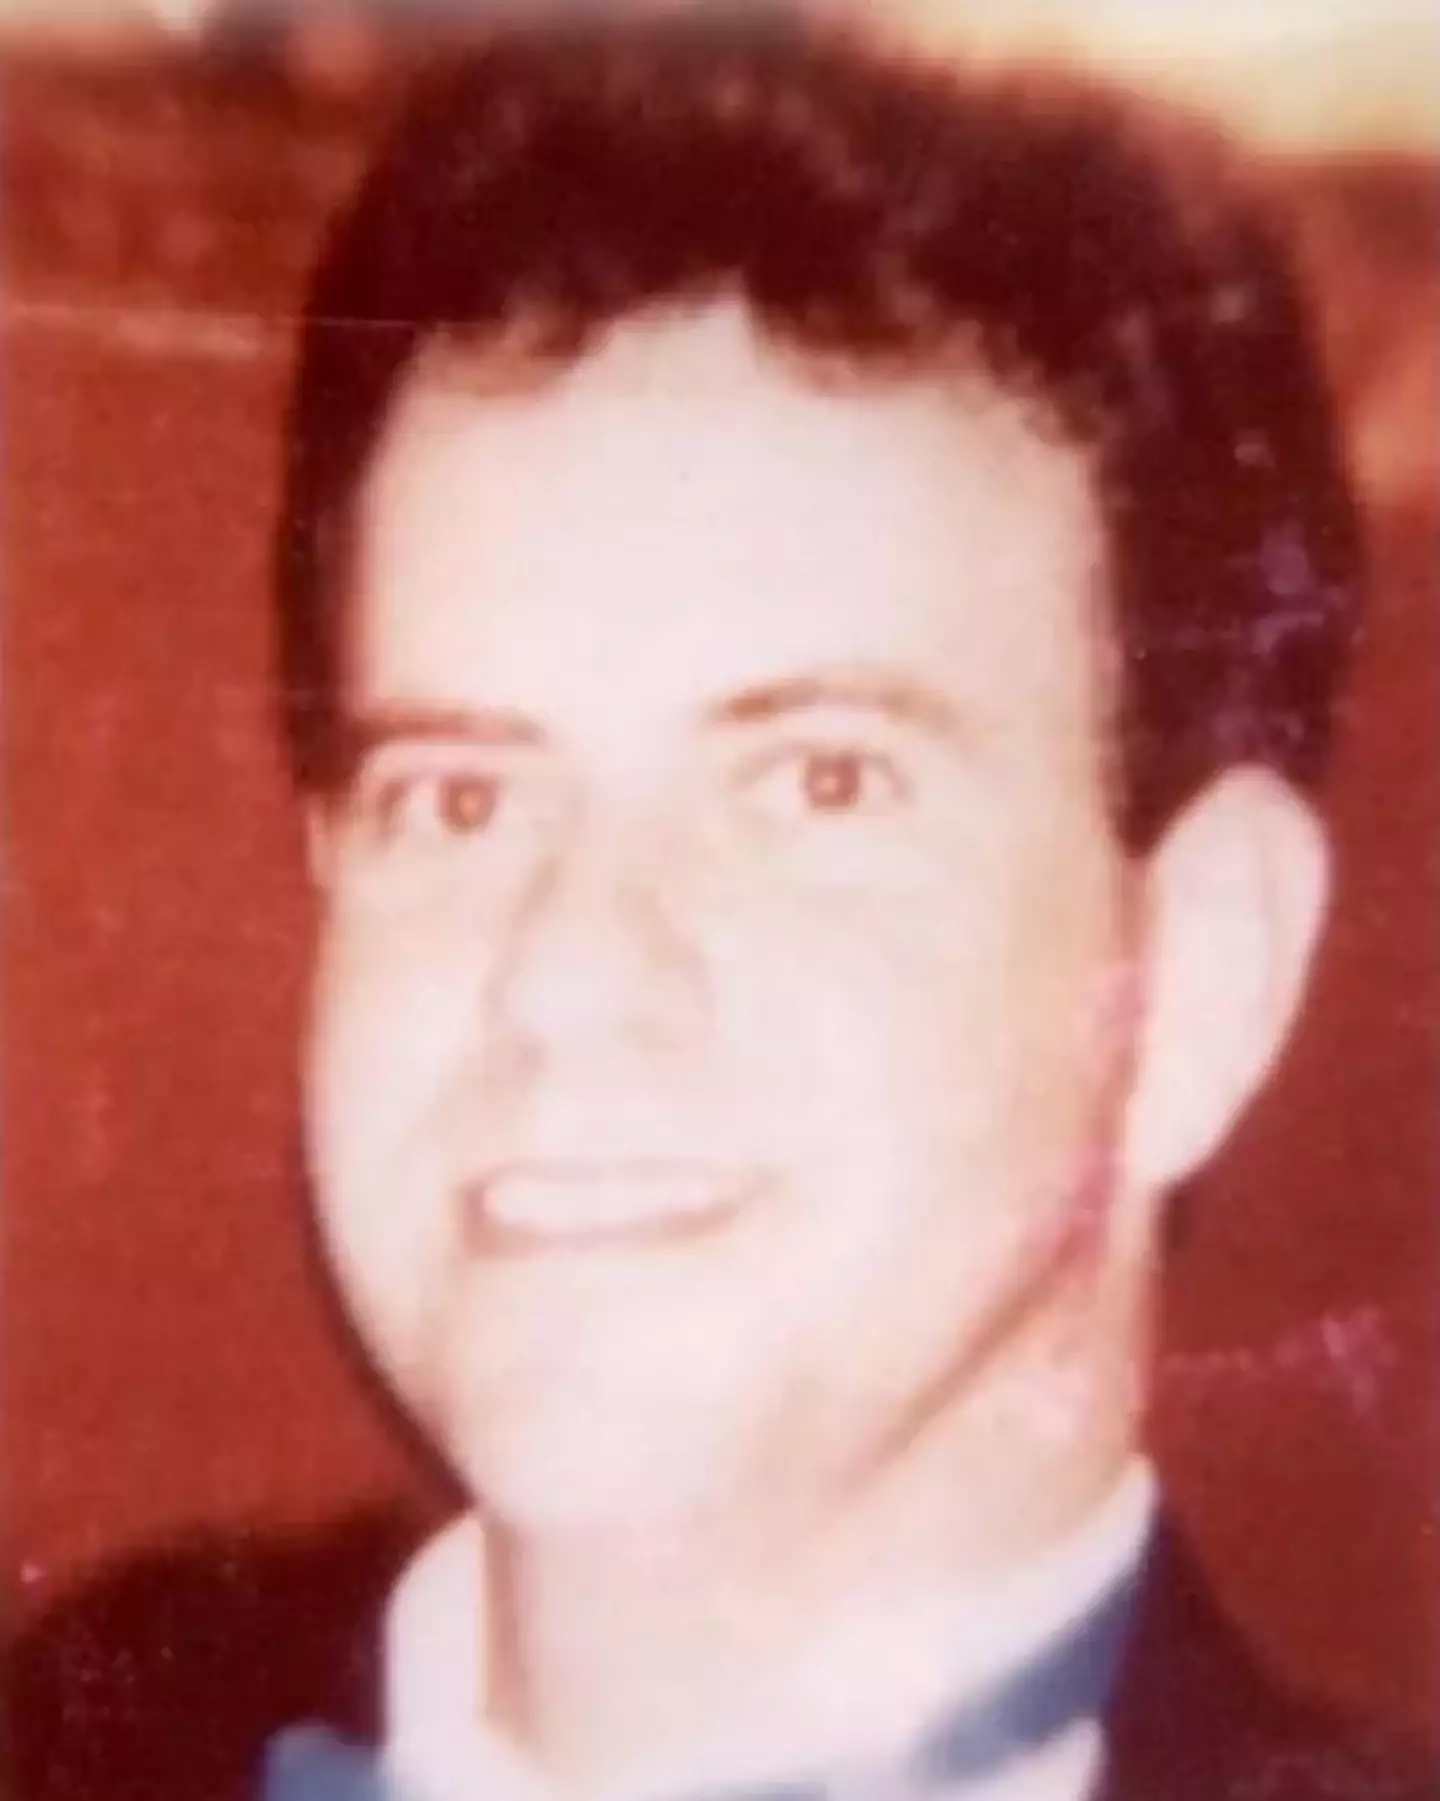 William Moldt was missing for 22 years before the chilling discovery was made (National Missing and Unidentified Persons System)